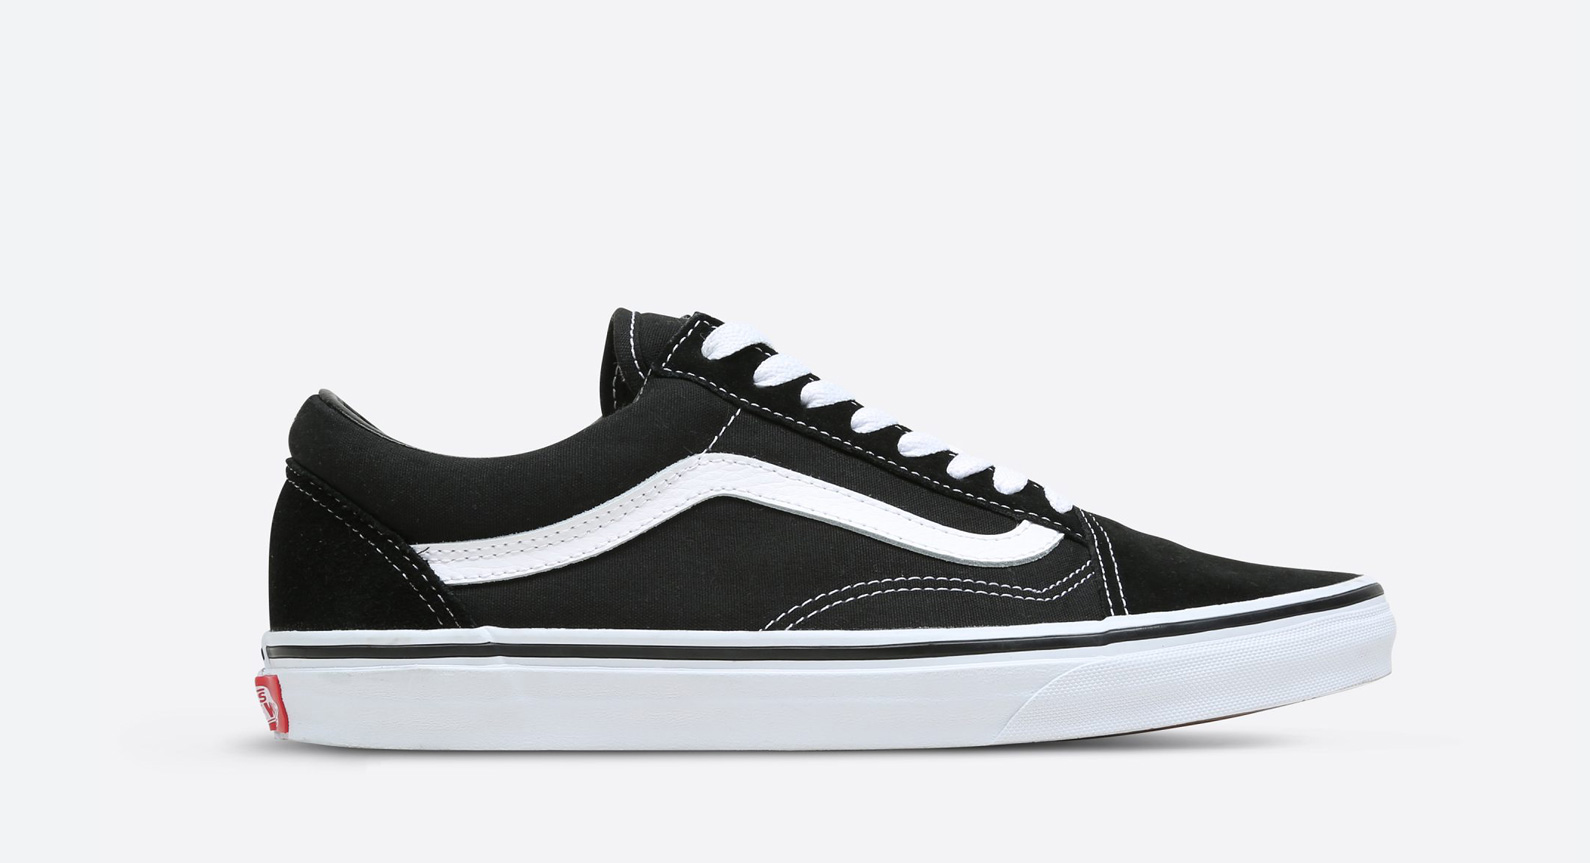 Vans Sneaker Sizing & Fit Guide 2020 - OPUMO Magazine